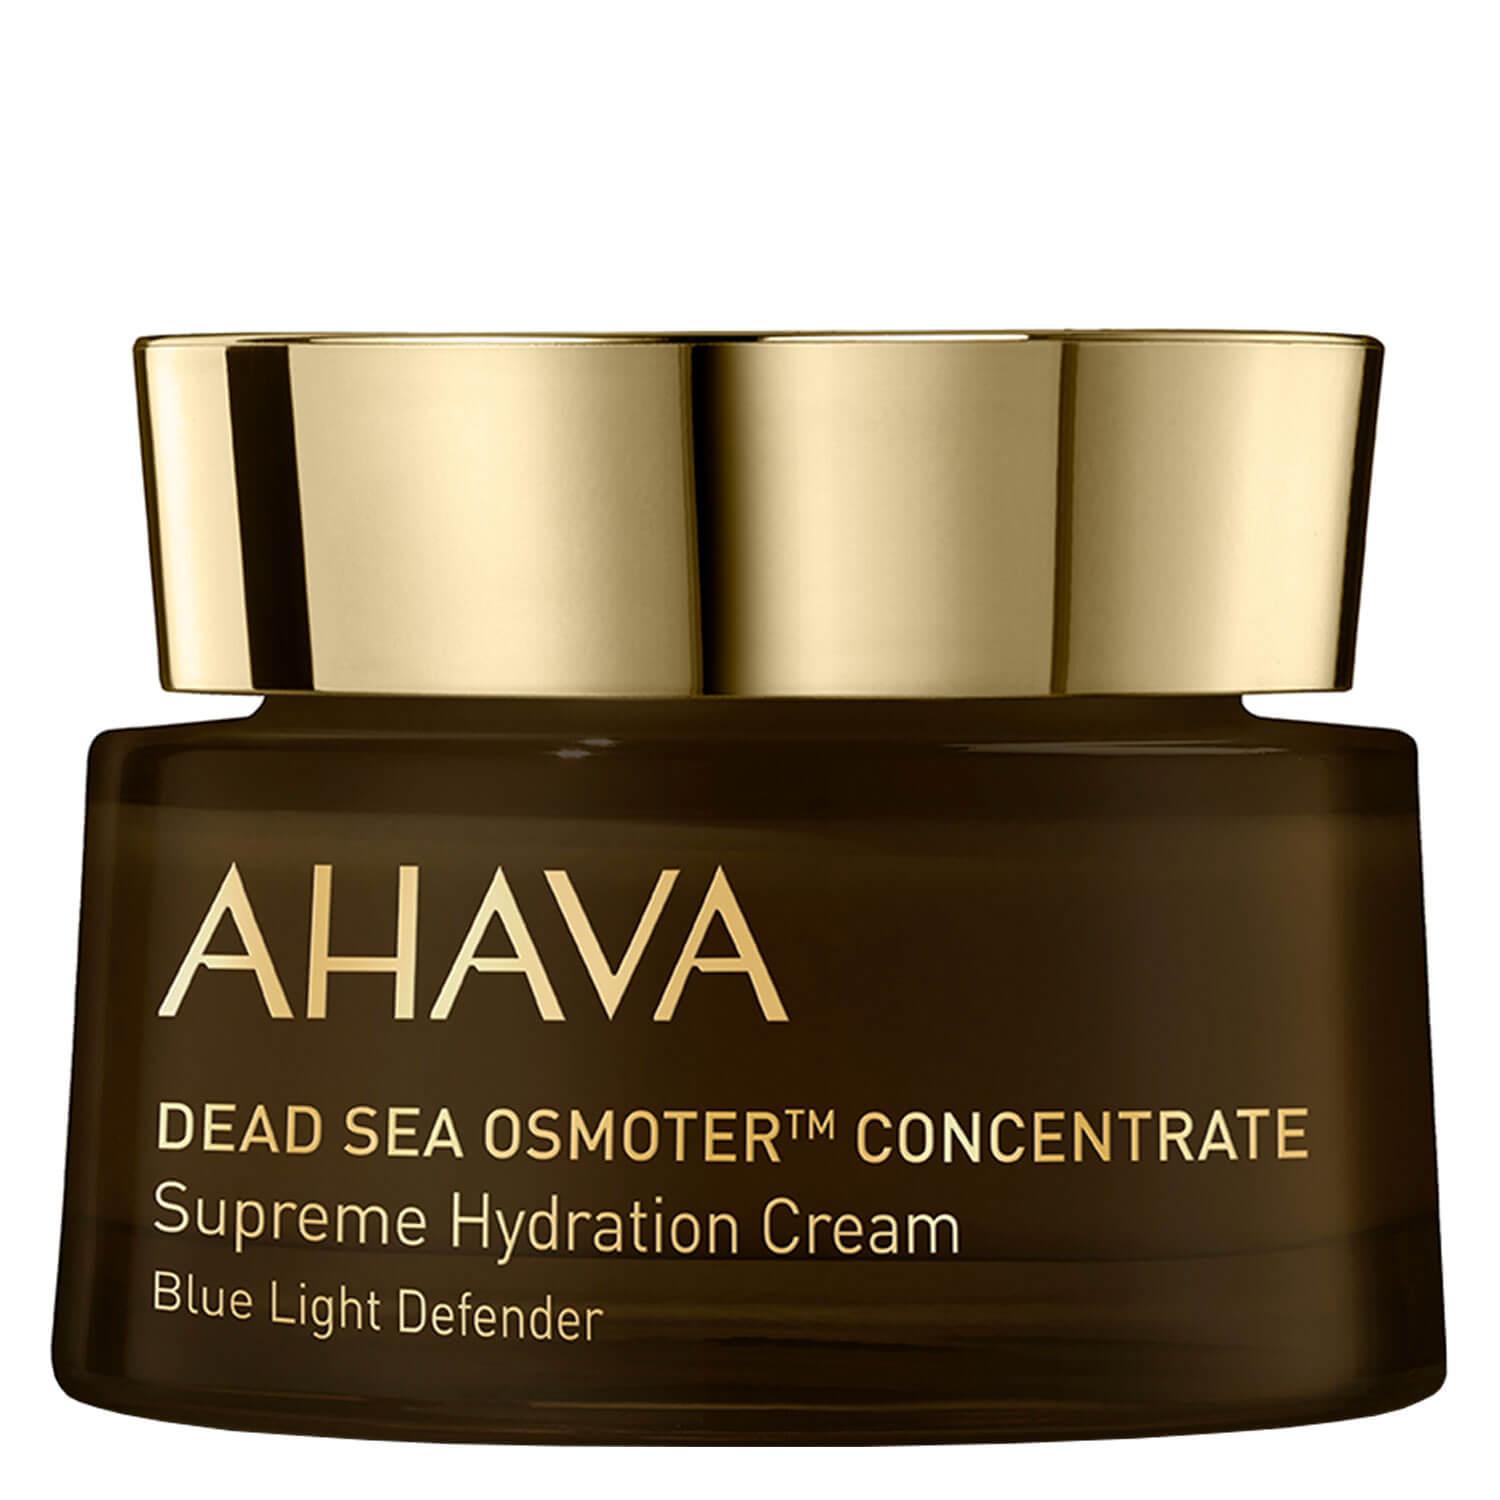 DeadSea Osmoter - Concentrate Hydrating Cream